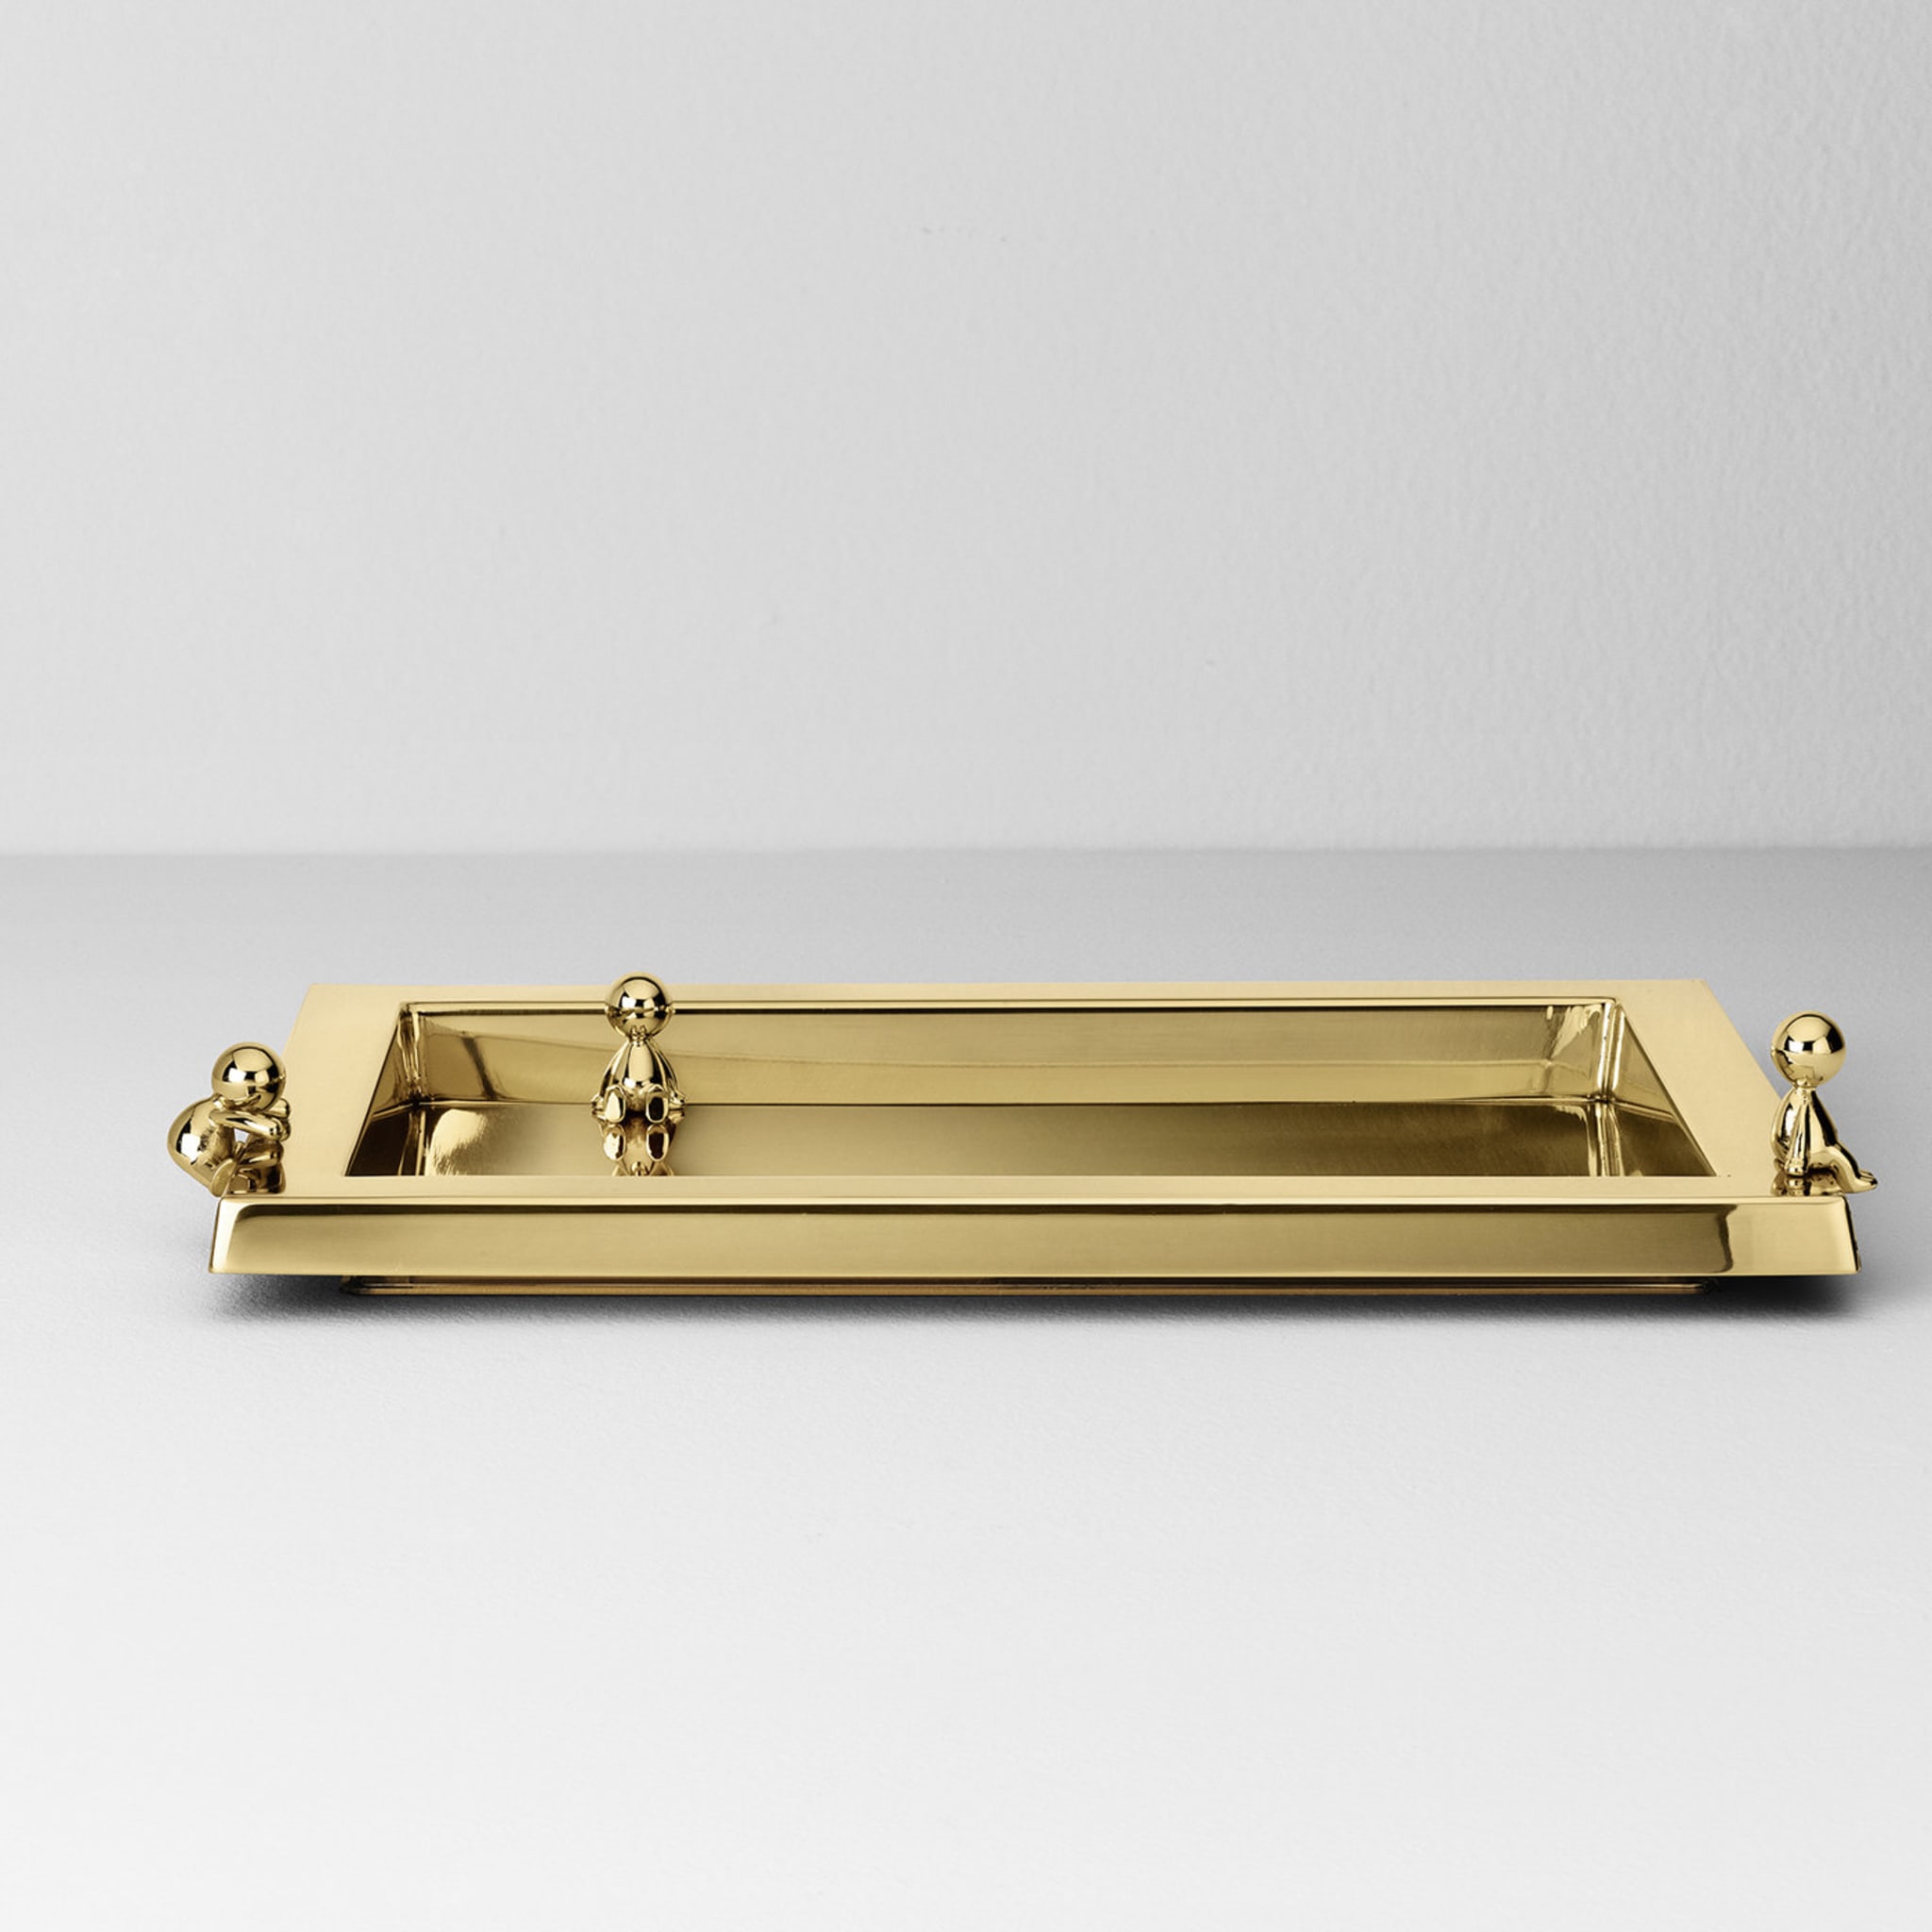 Omini Tray in Polished Brass By Stefano Giovannoni - Alternative view 2